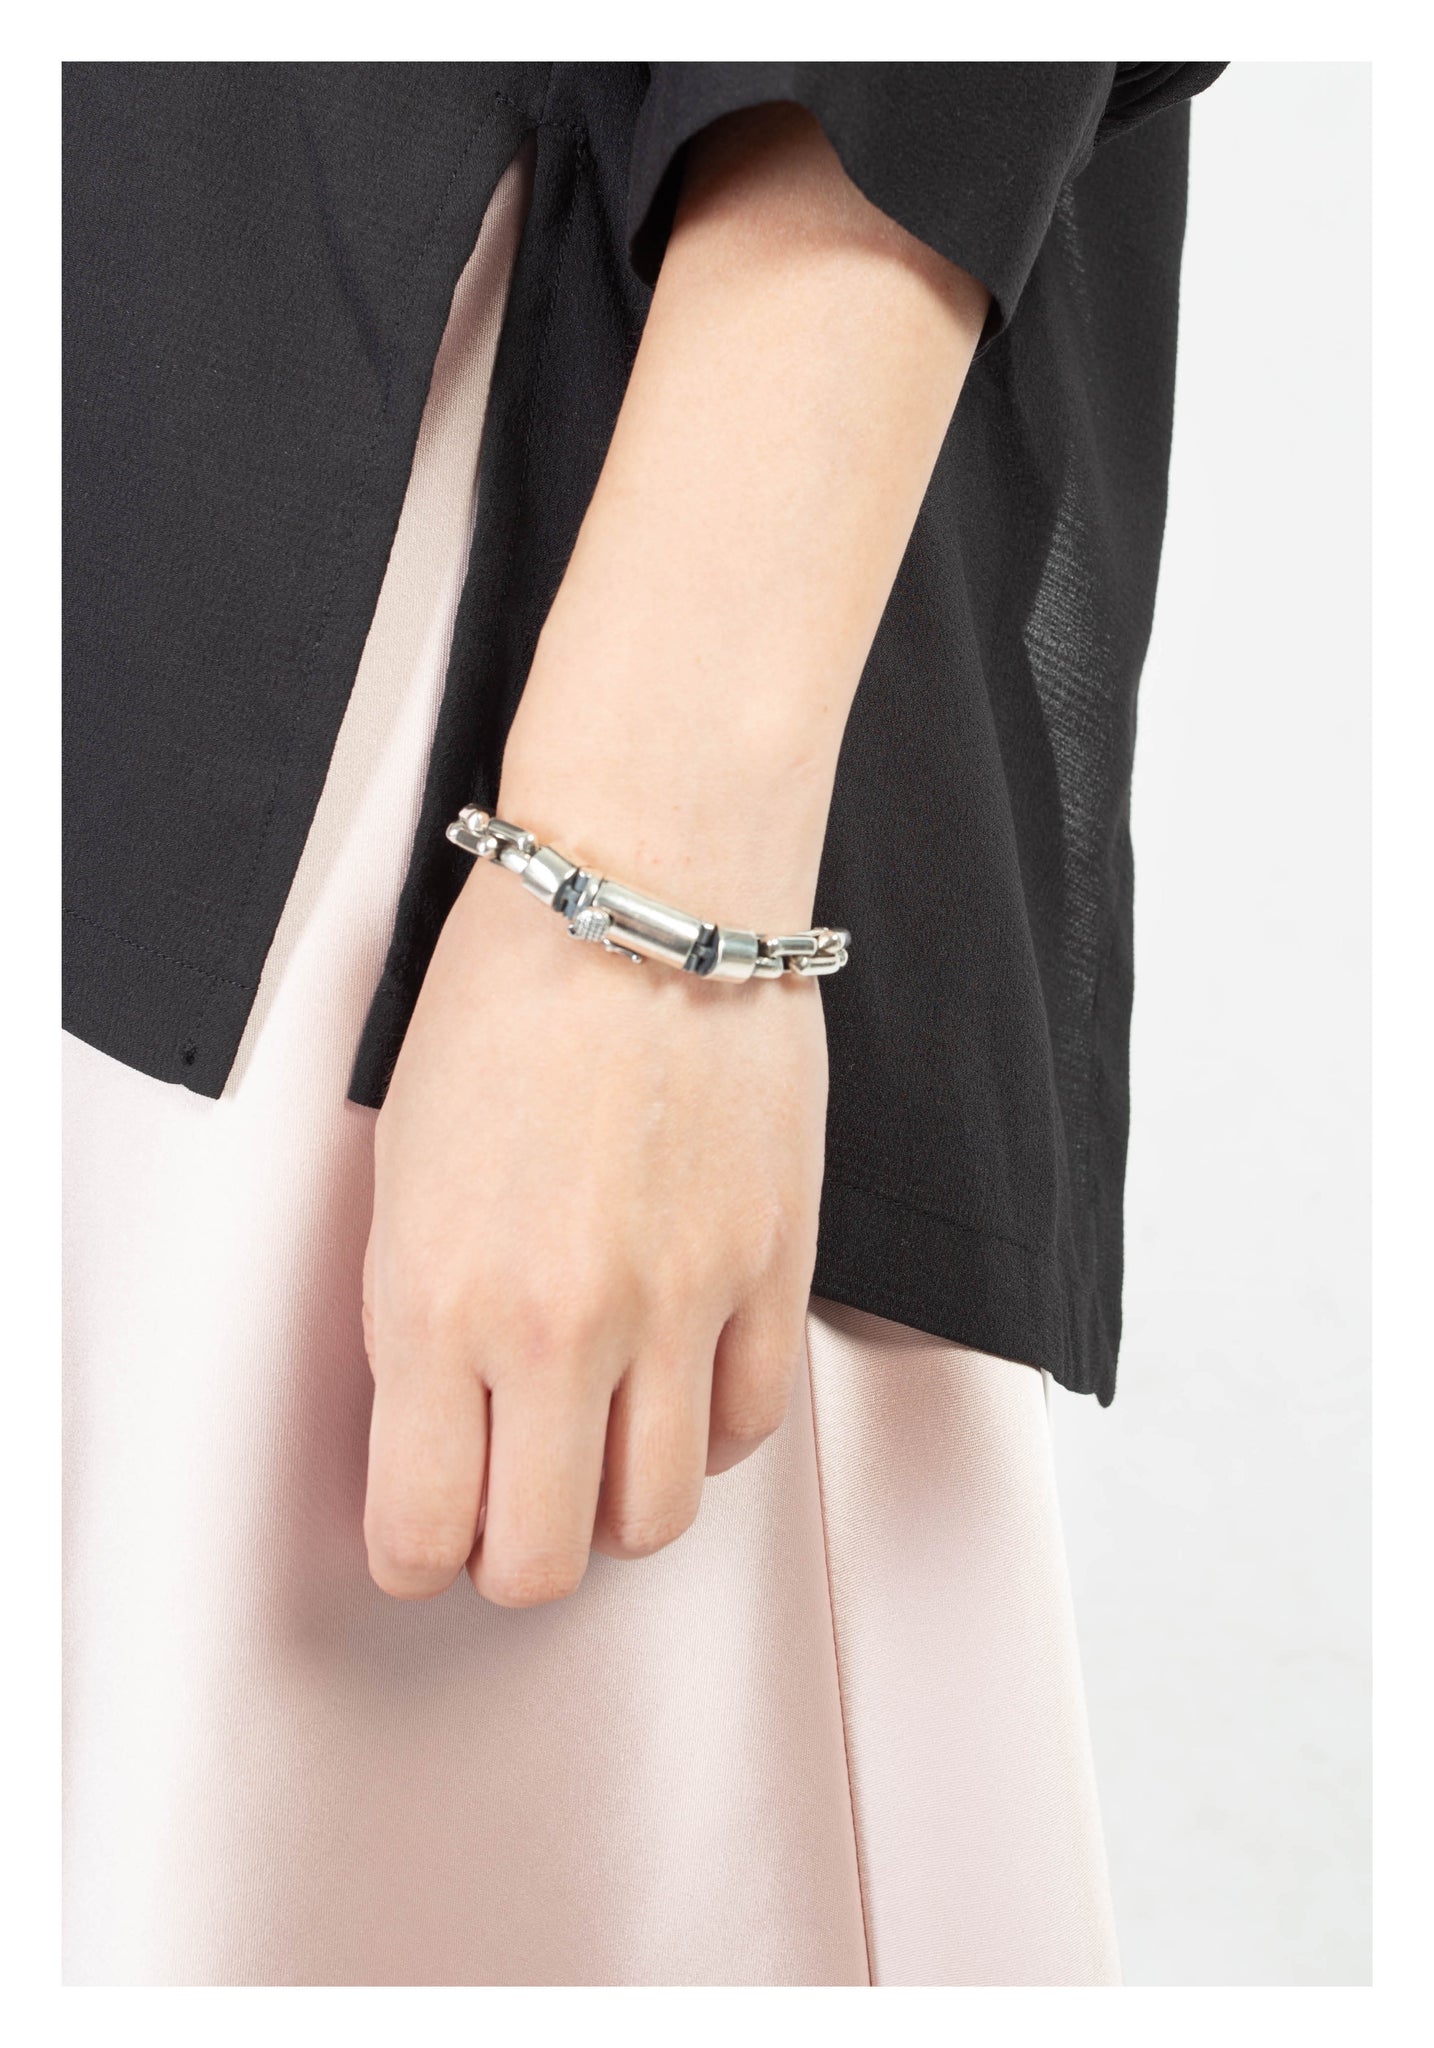 925 Silver Delicate Buckle Thick Rectangular Chain Bracelet